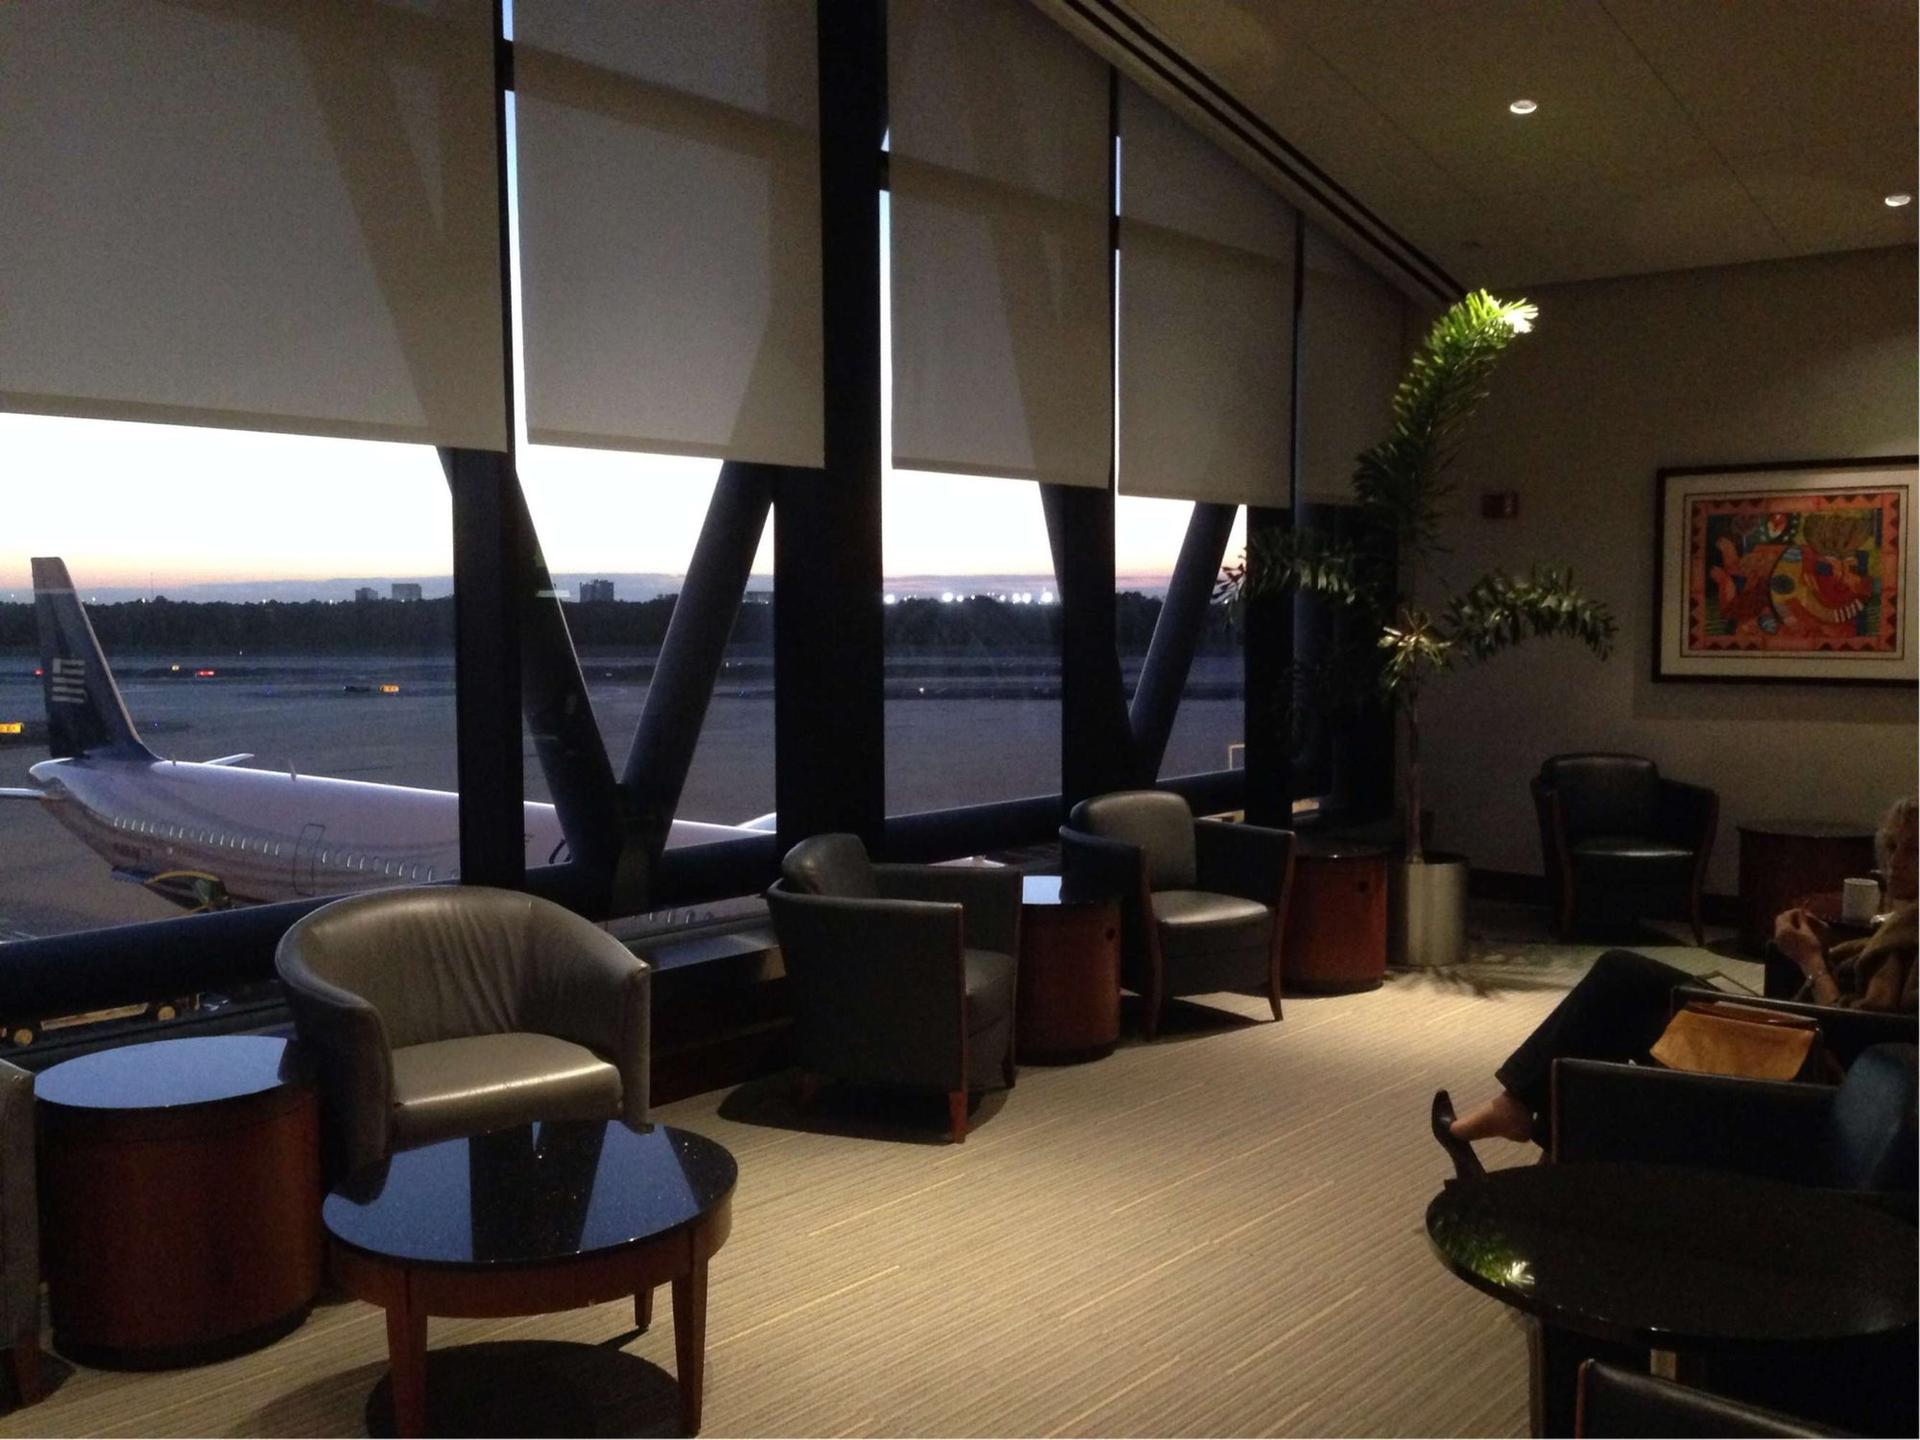 American Airlines Admirals Club image 4 of 20